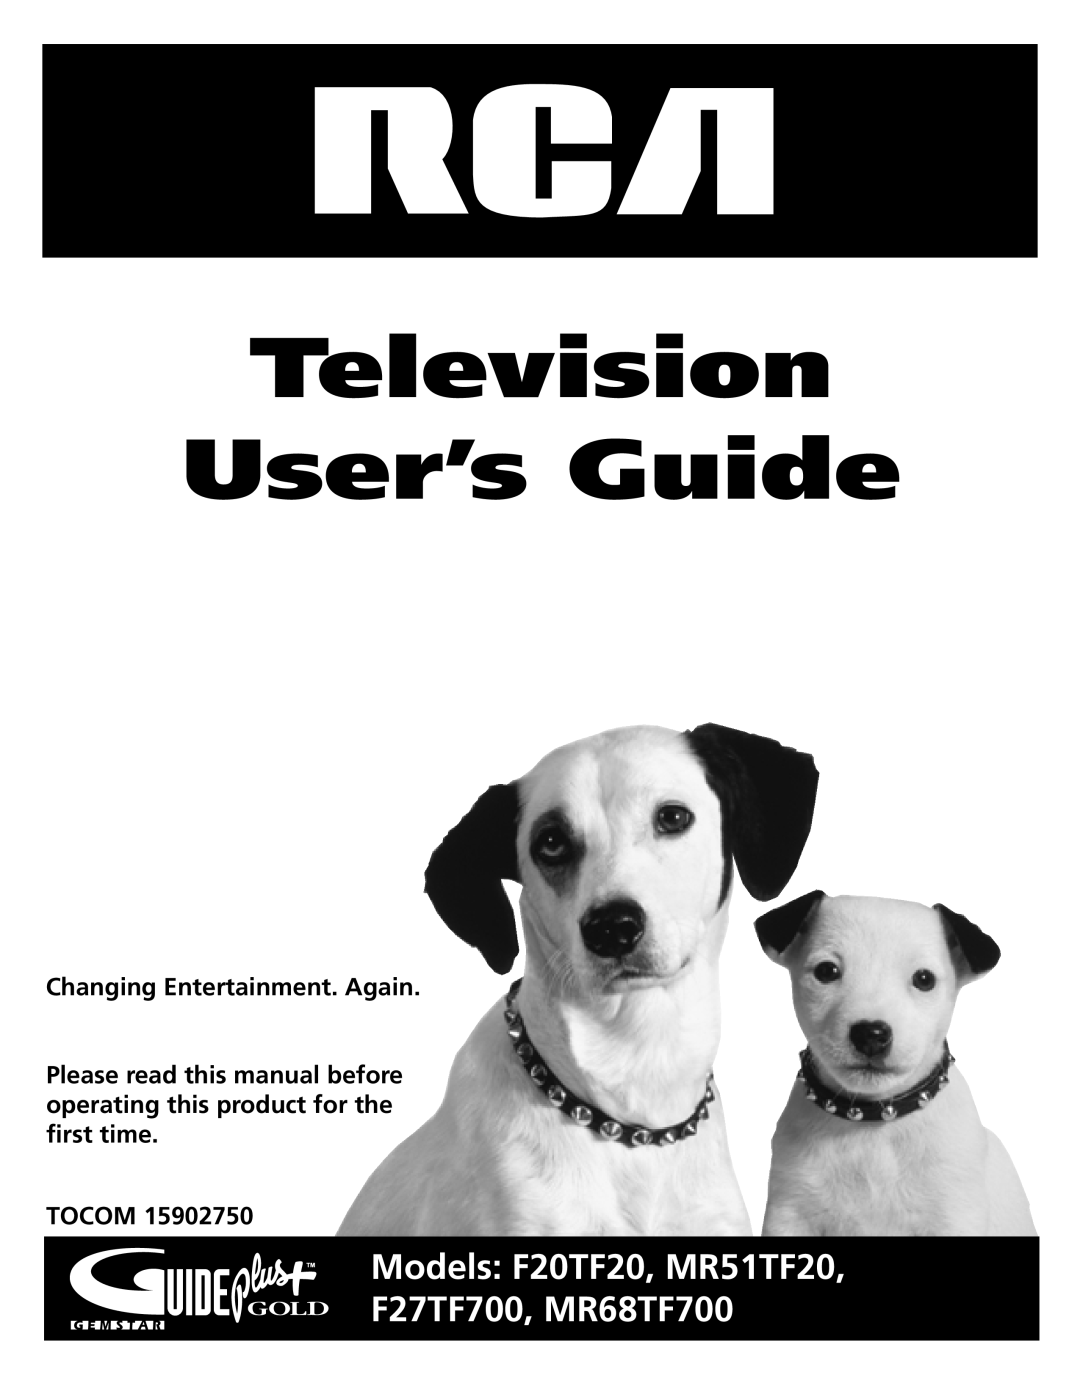 RCA MR68TF700 manual Changing Entertainment. Again, Tocom, Television User’s Guide 